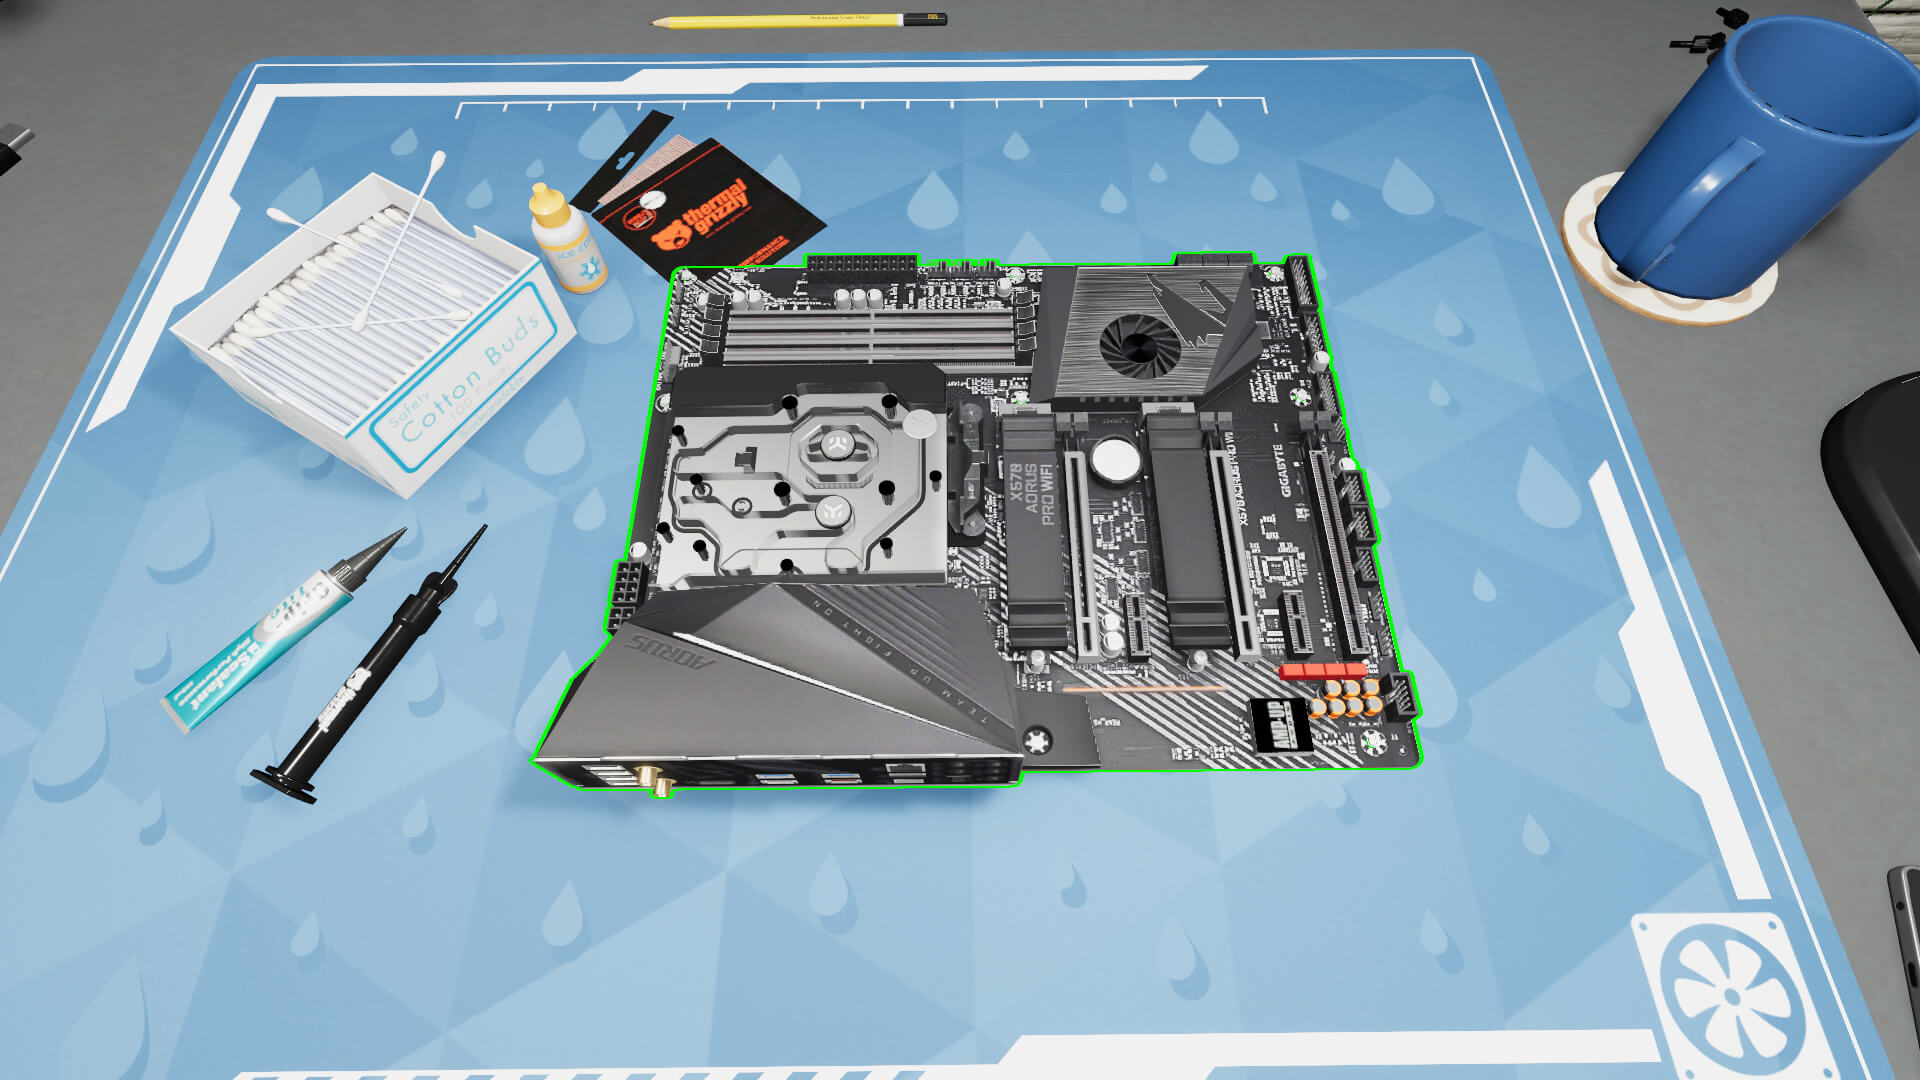 A screenshot from PC Building Simulator 2, in which an empty motherboard rests on a desk, surrounded by paraphernalia such as thermal paste